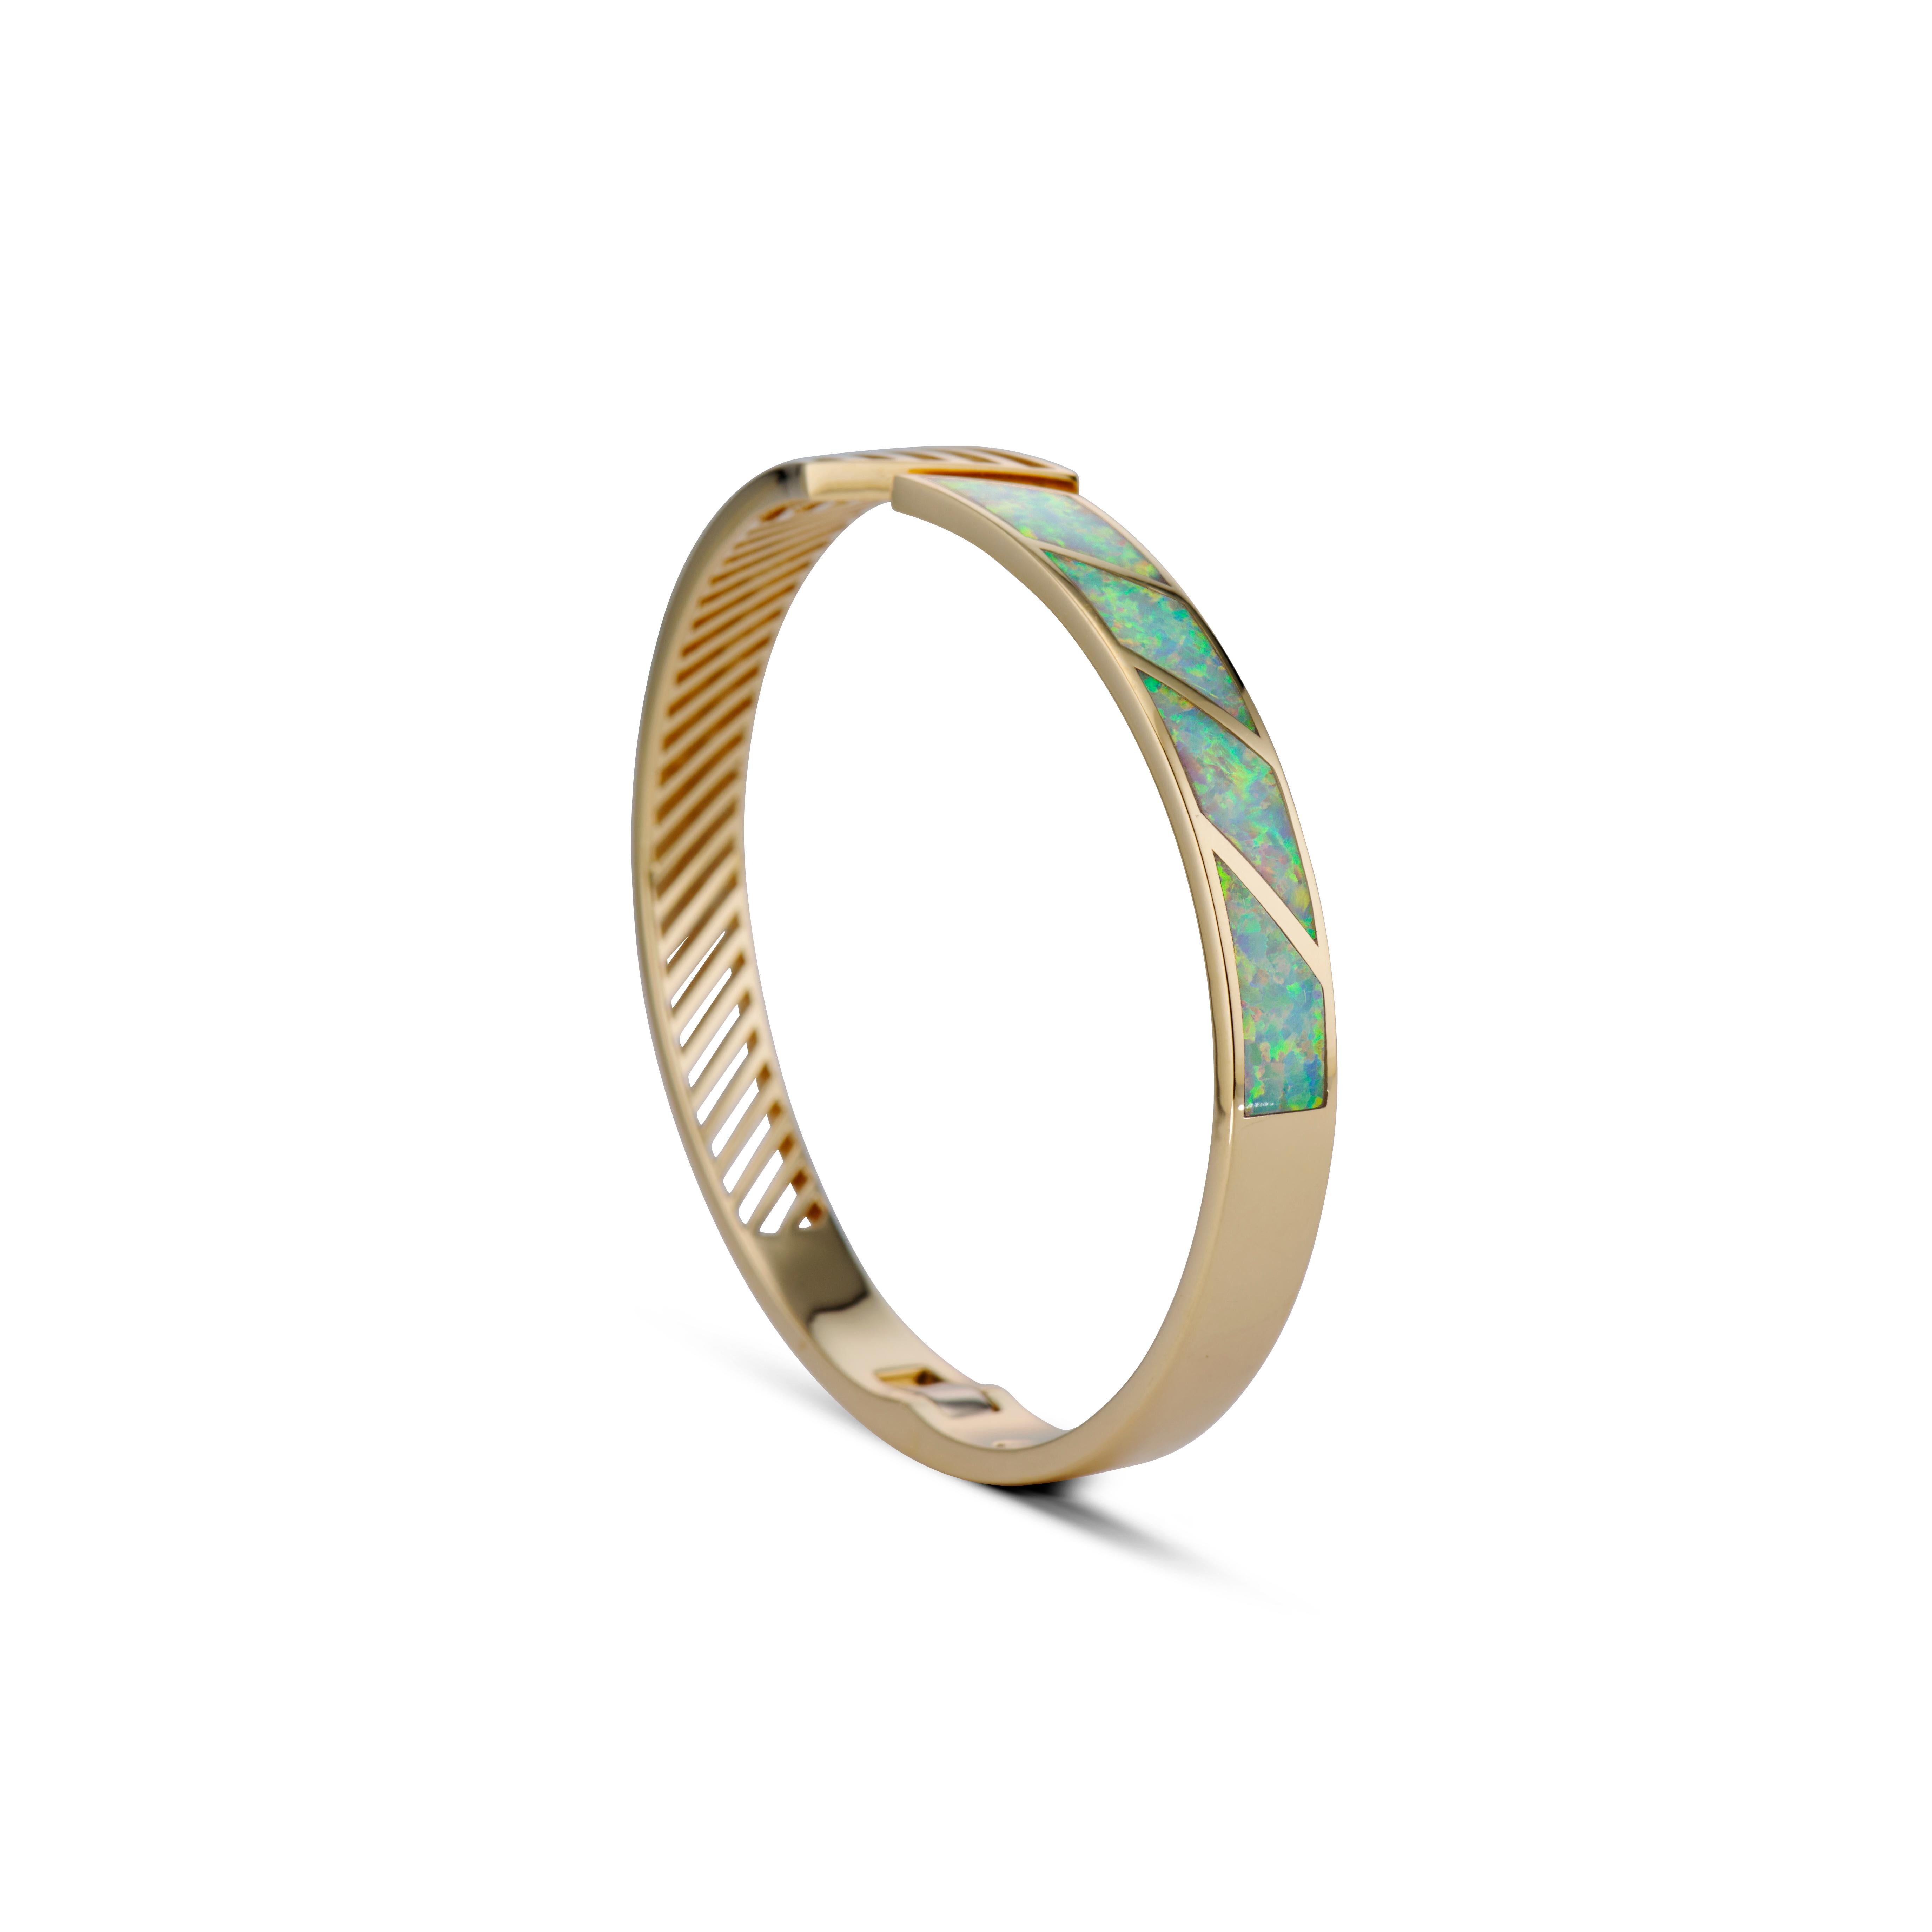 The one-of-a-kind FENESTRA IN-LAY BANGLE beautifully marries intricate white opal inlay craftsmanship with sharp, contrasting linear lines on the opposite side of the bangle. Just as we all possess a variety of facets in our personalities, this